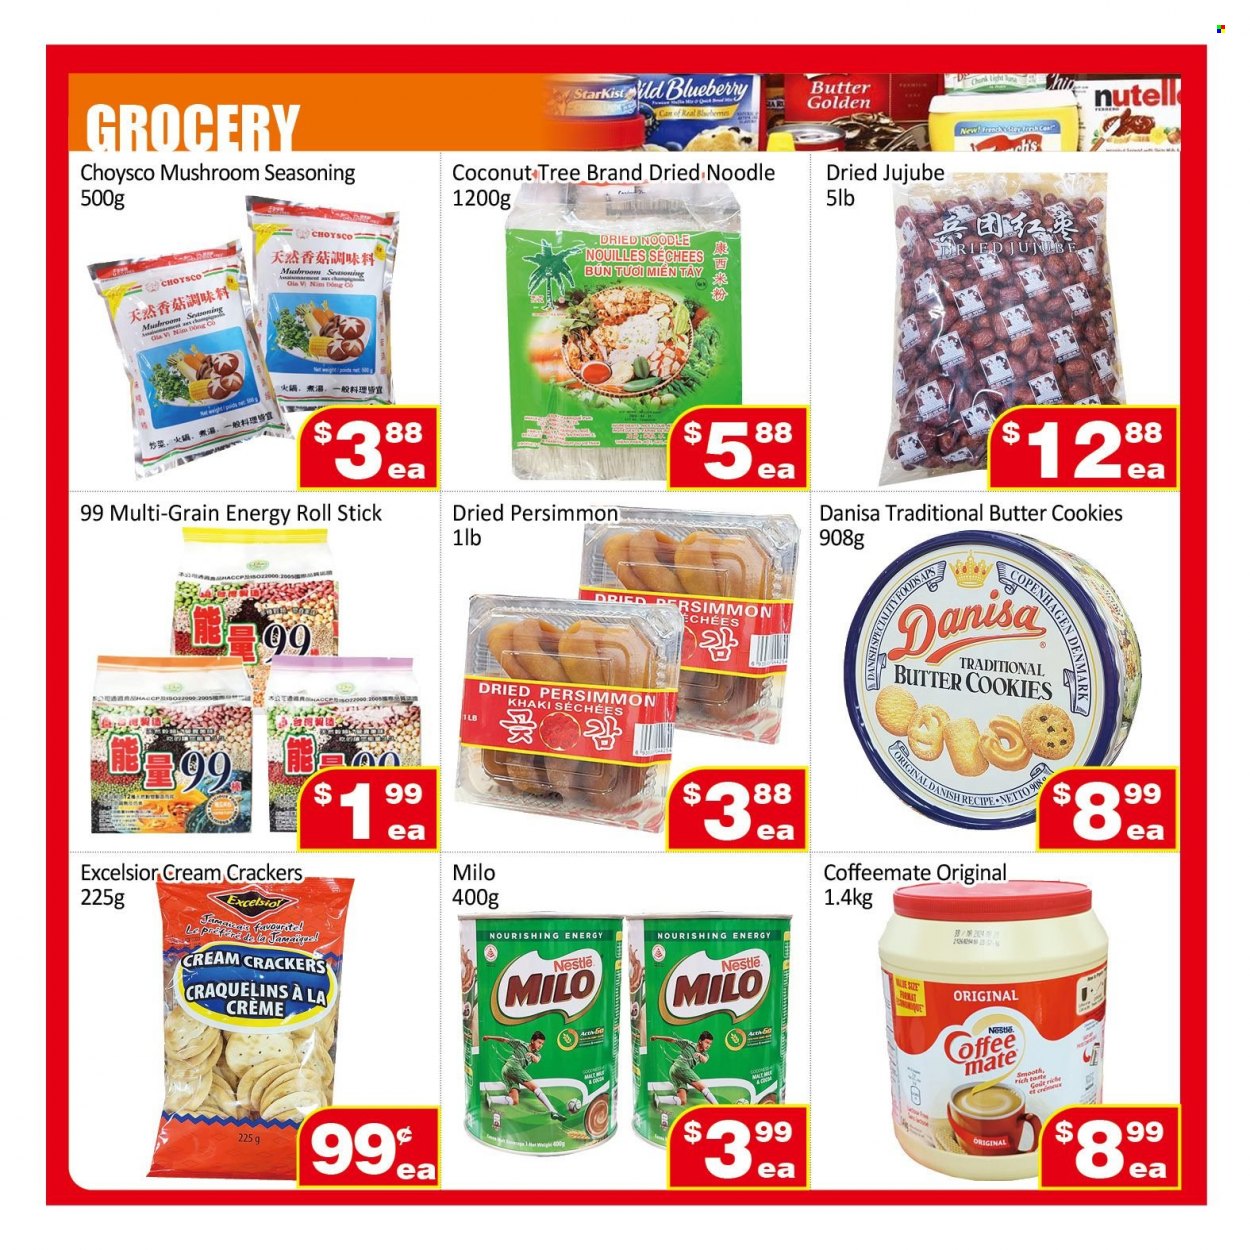 Jian Hing Supermarket Flyer - November 25, 2022 - December 01, 2022 - Sales products - persimmons, jujube, coconut, noodles, Coffee-Mate, Milo, cookies, butter cookies, crackers, malt, spice, Nestlé. Page 2.